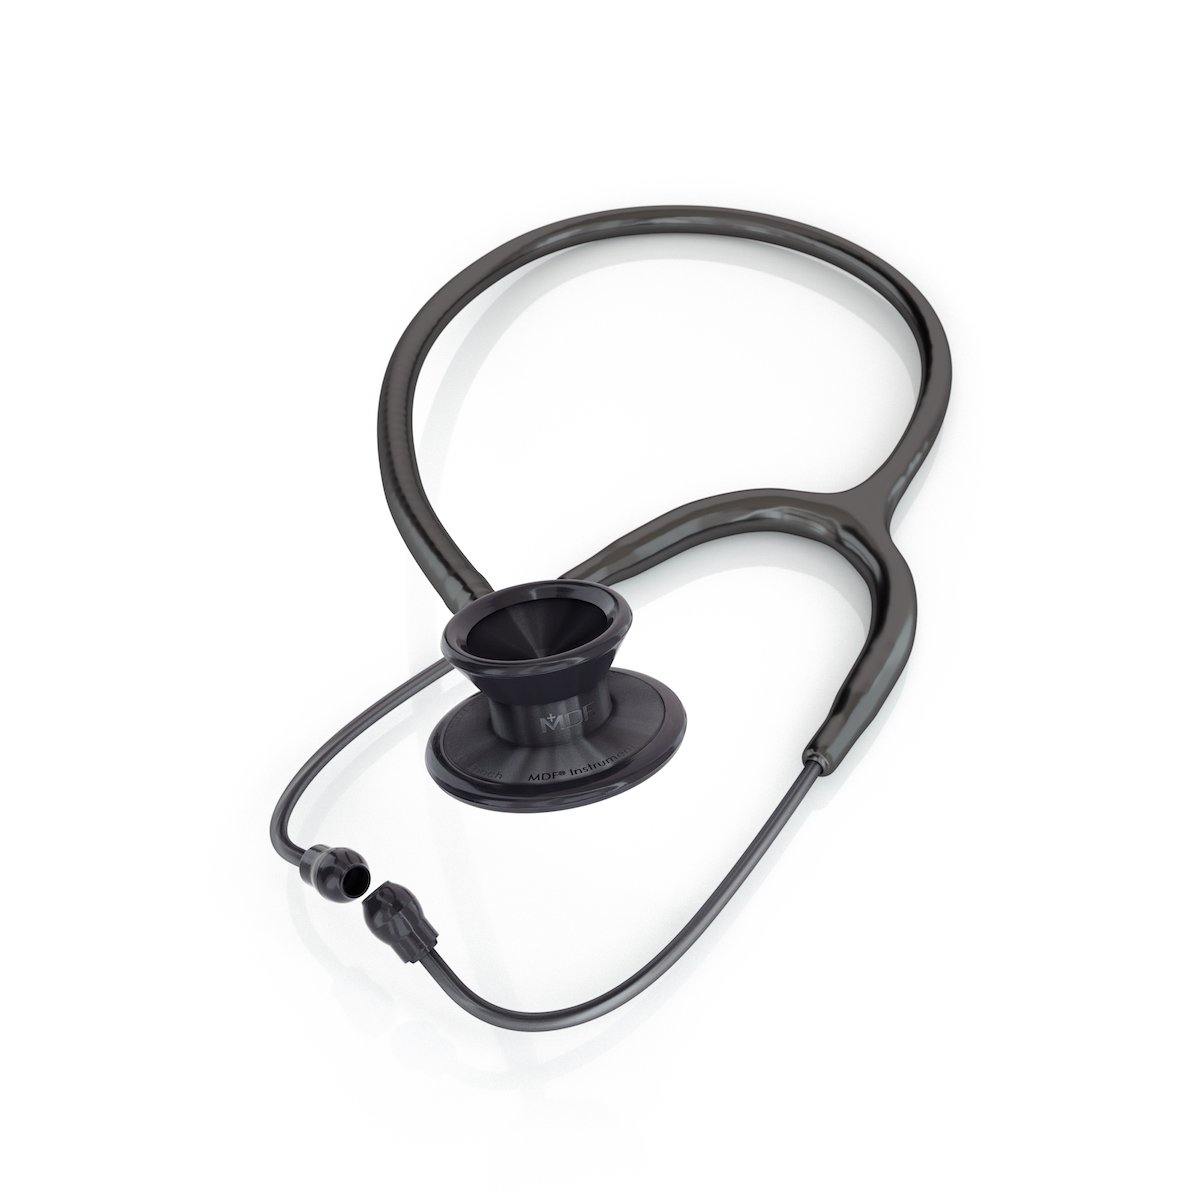 Clinical 1 Stethoscope